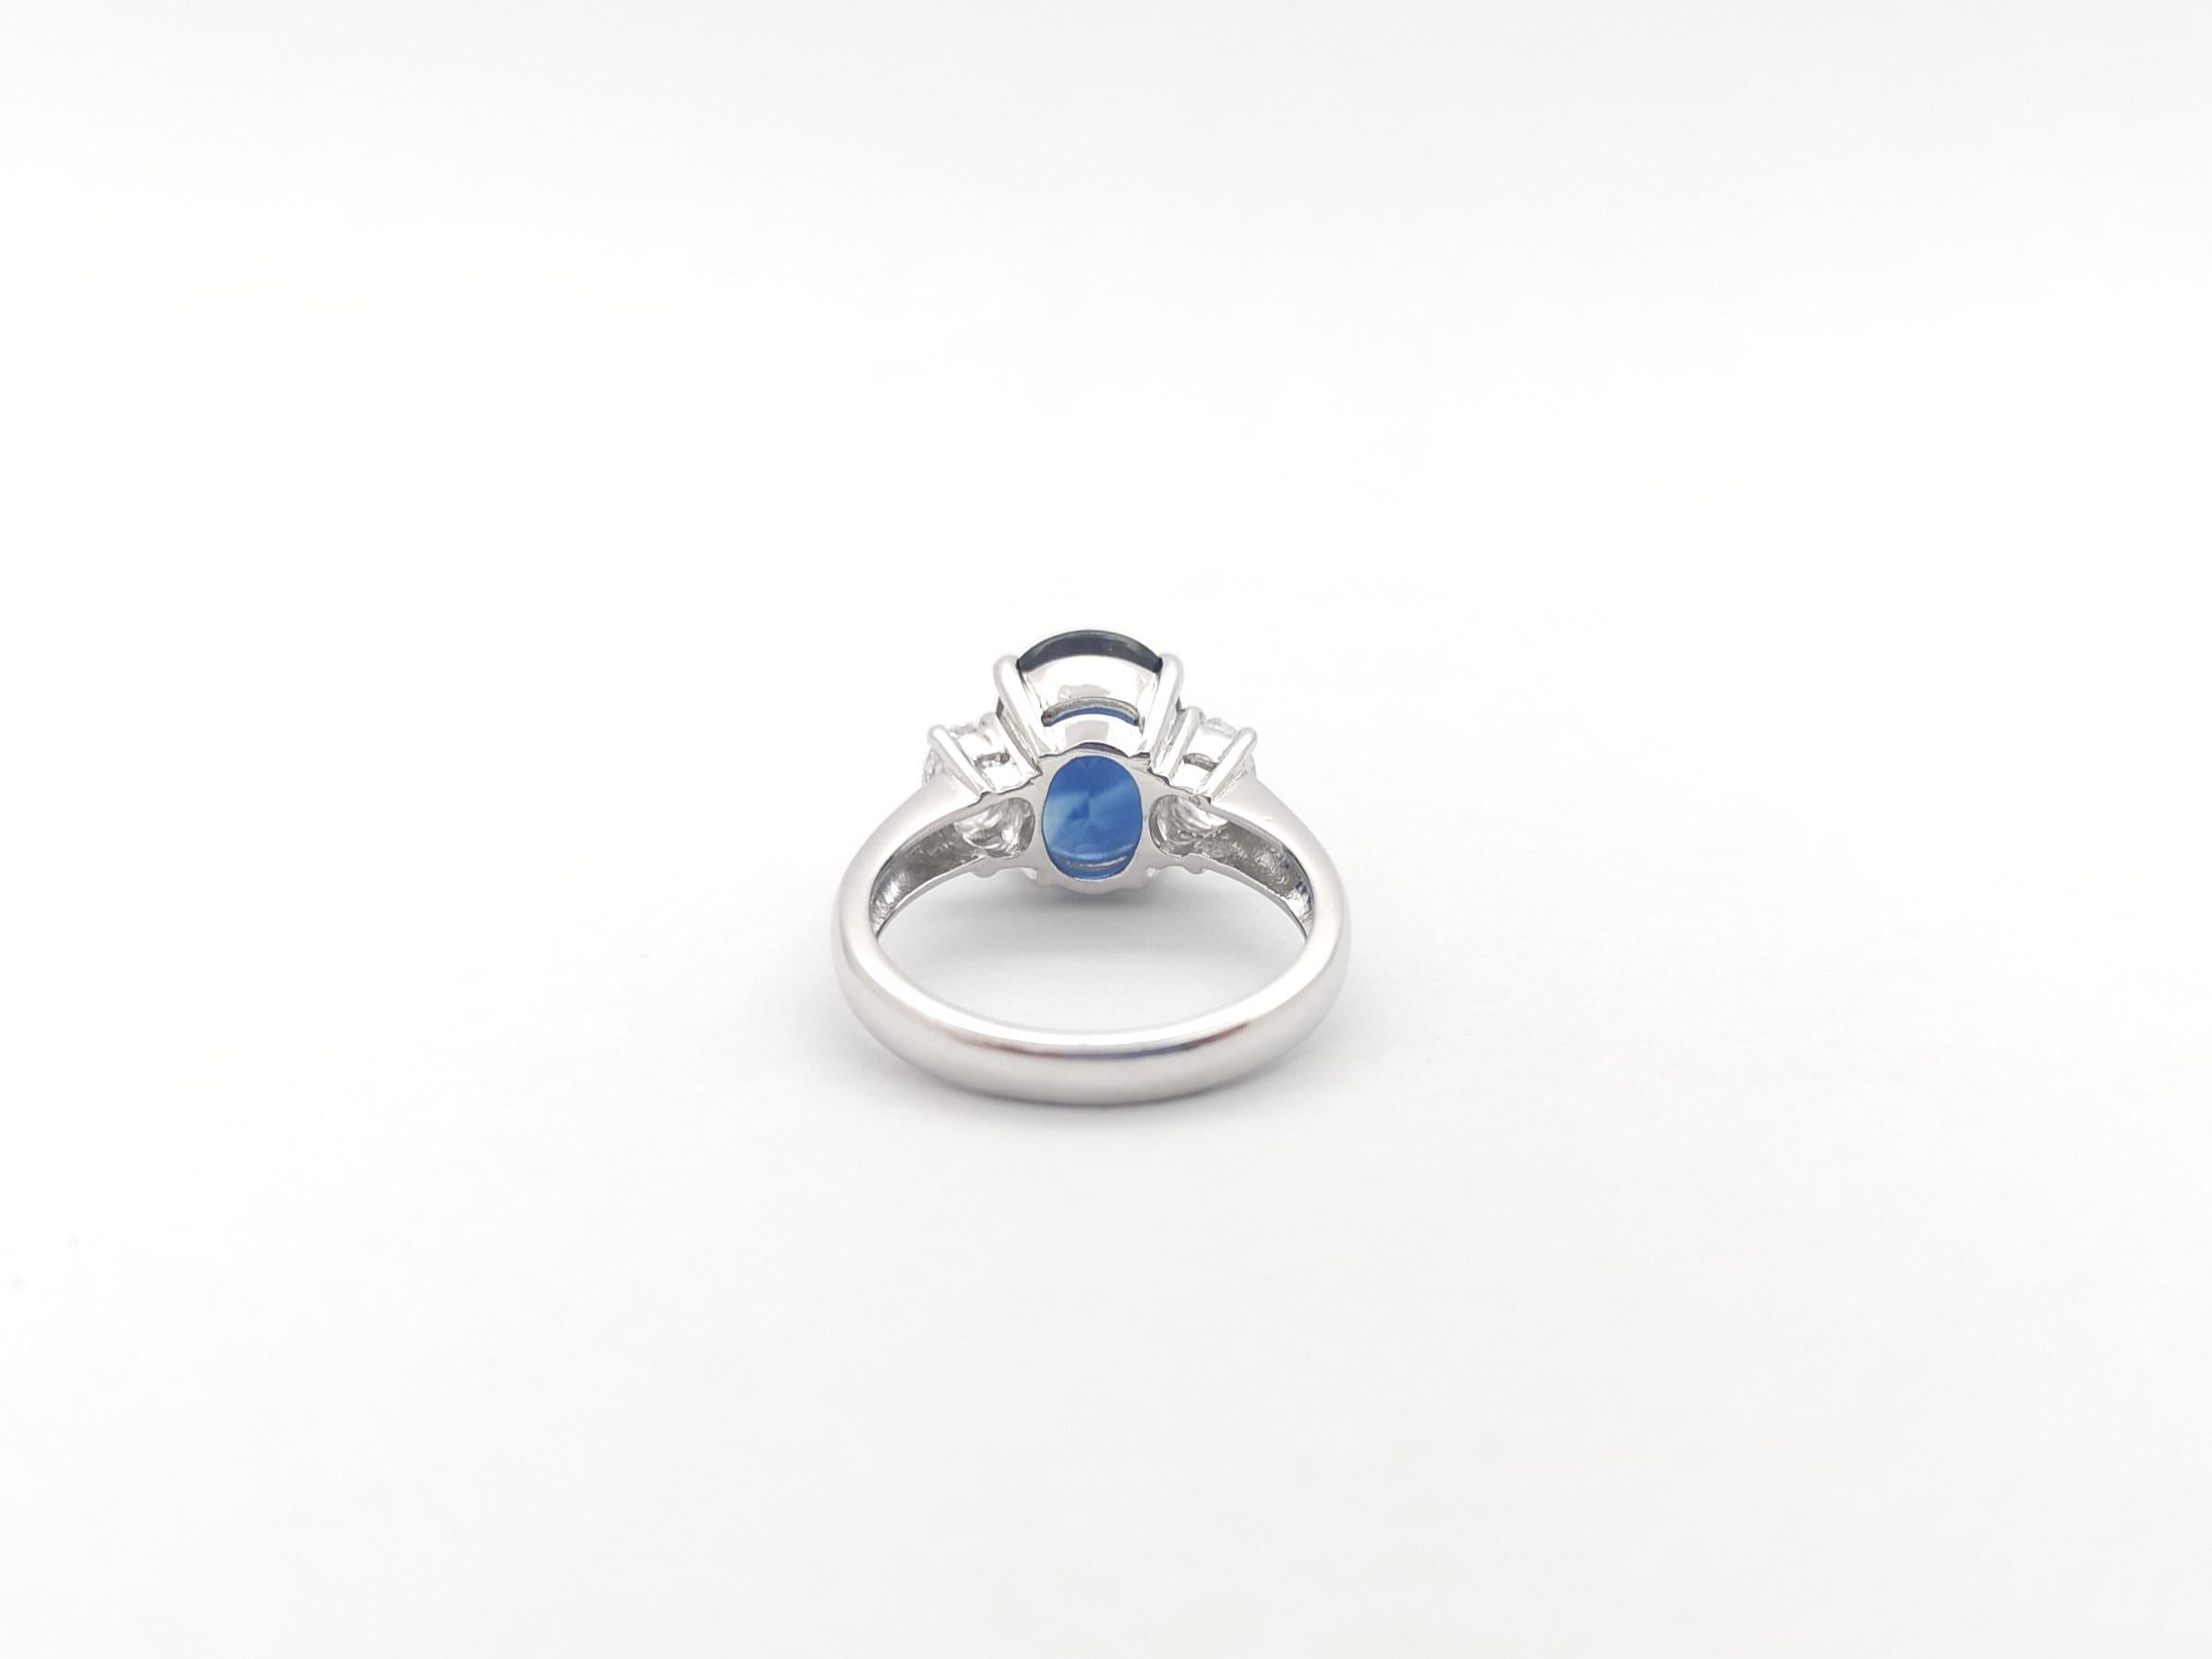 GIA Certified 3.89 cts Blue Sapphire with Diamond Ring set in Platinum 950  For Sale 5